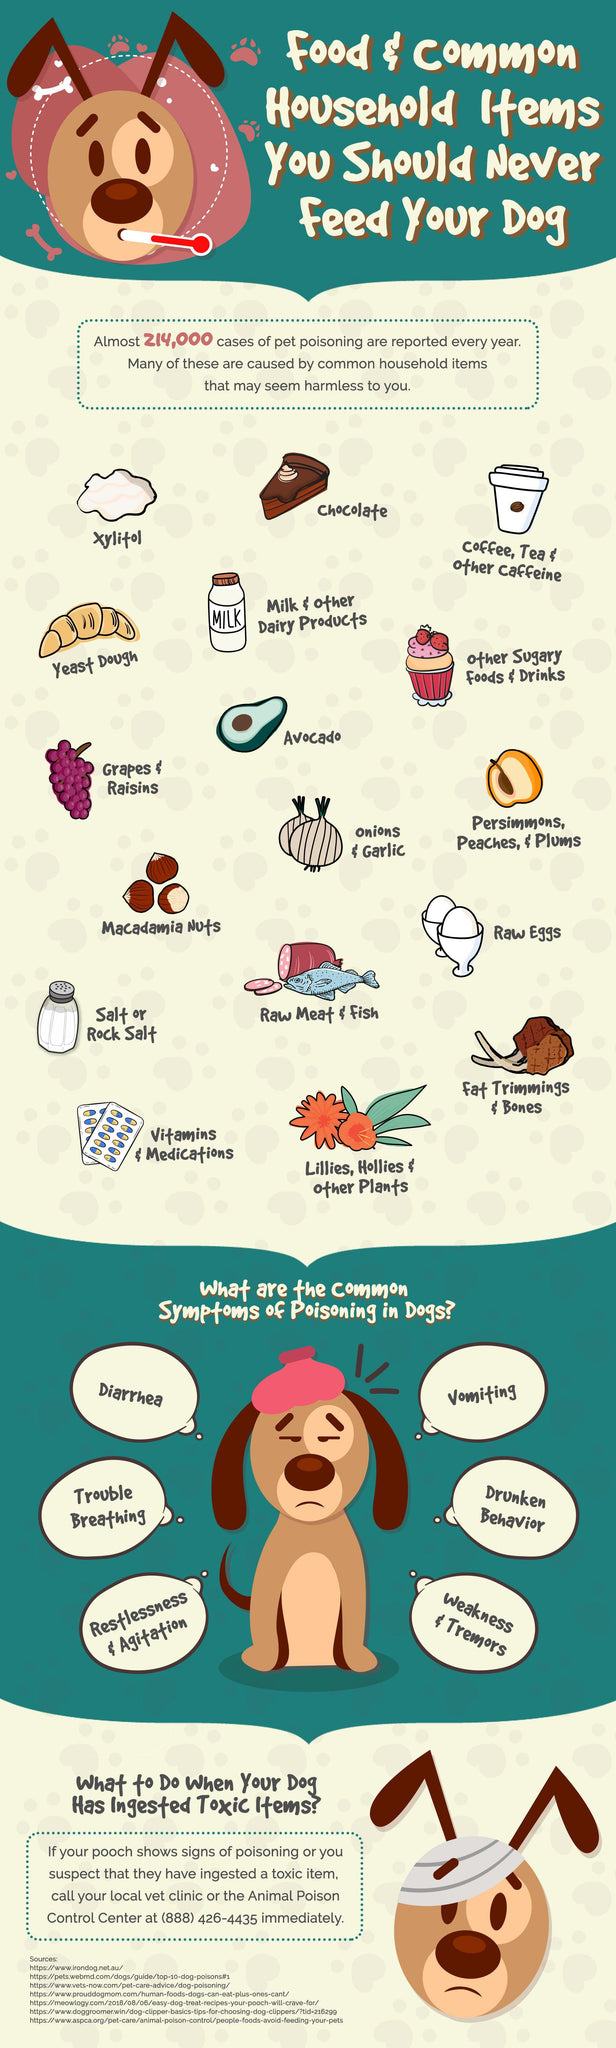 pet food poisoning causes infographic